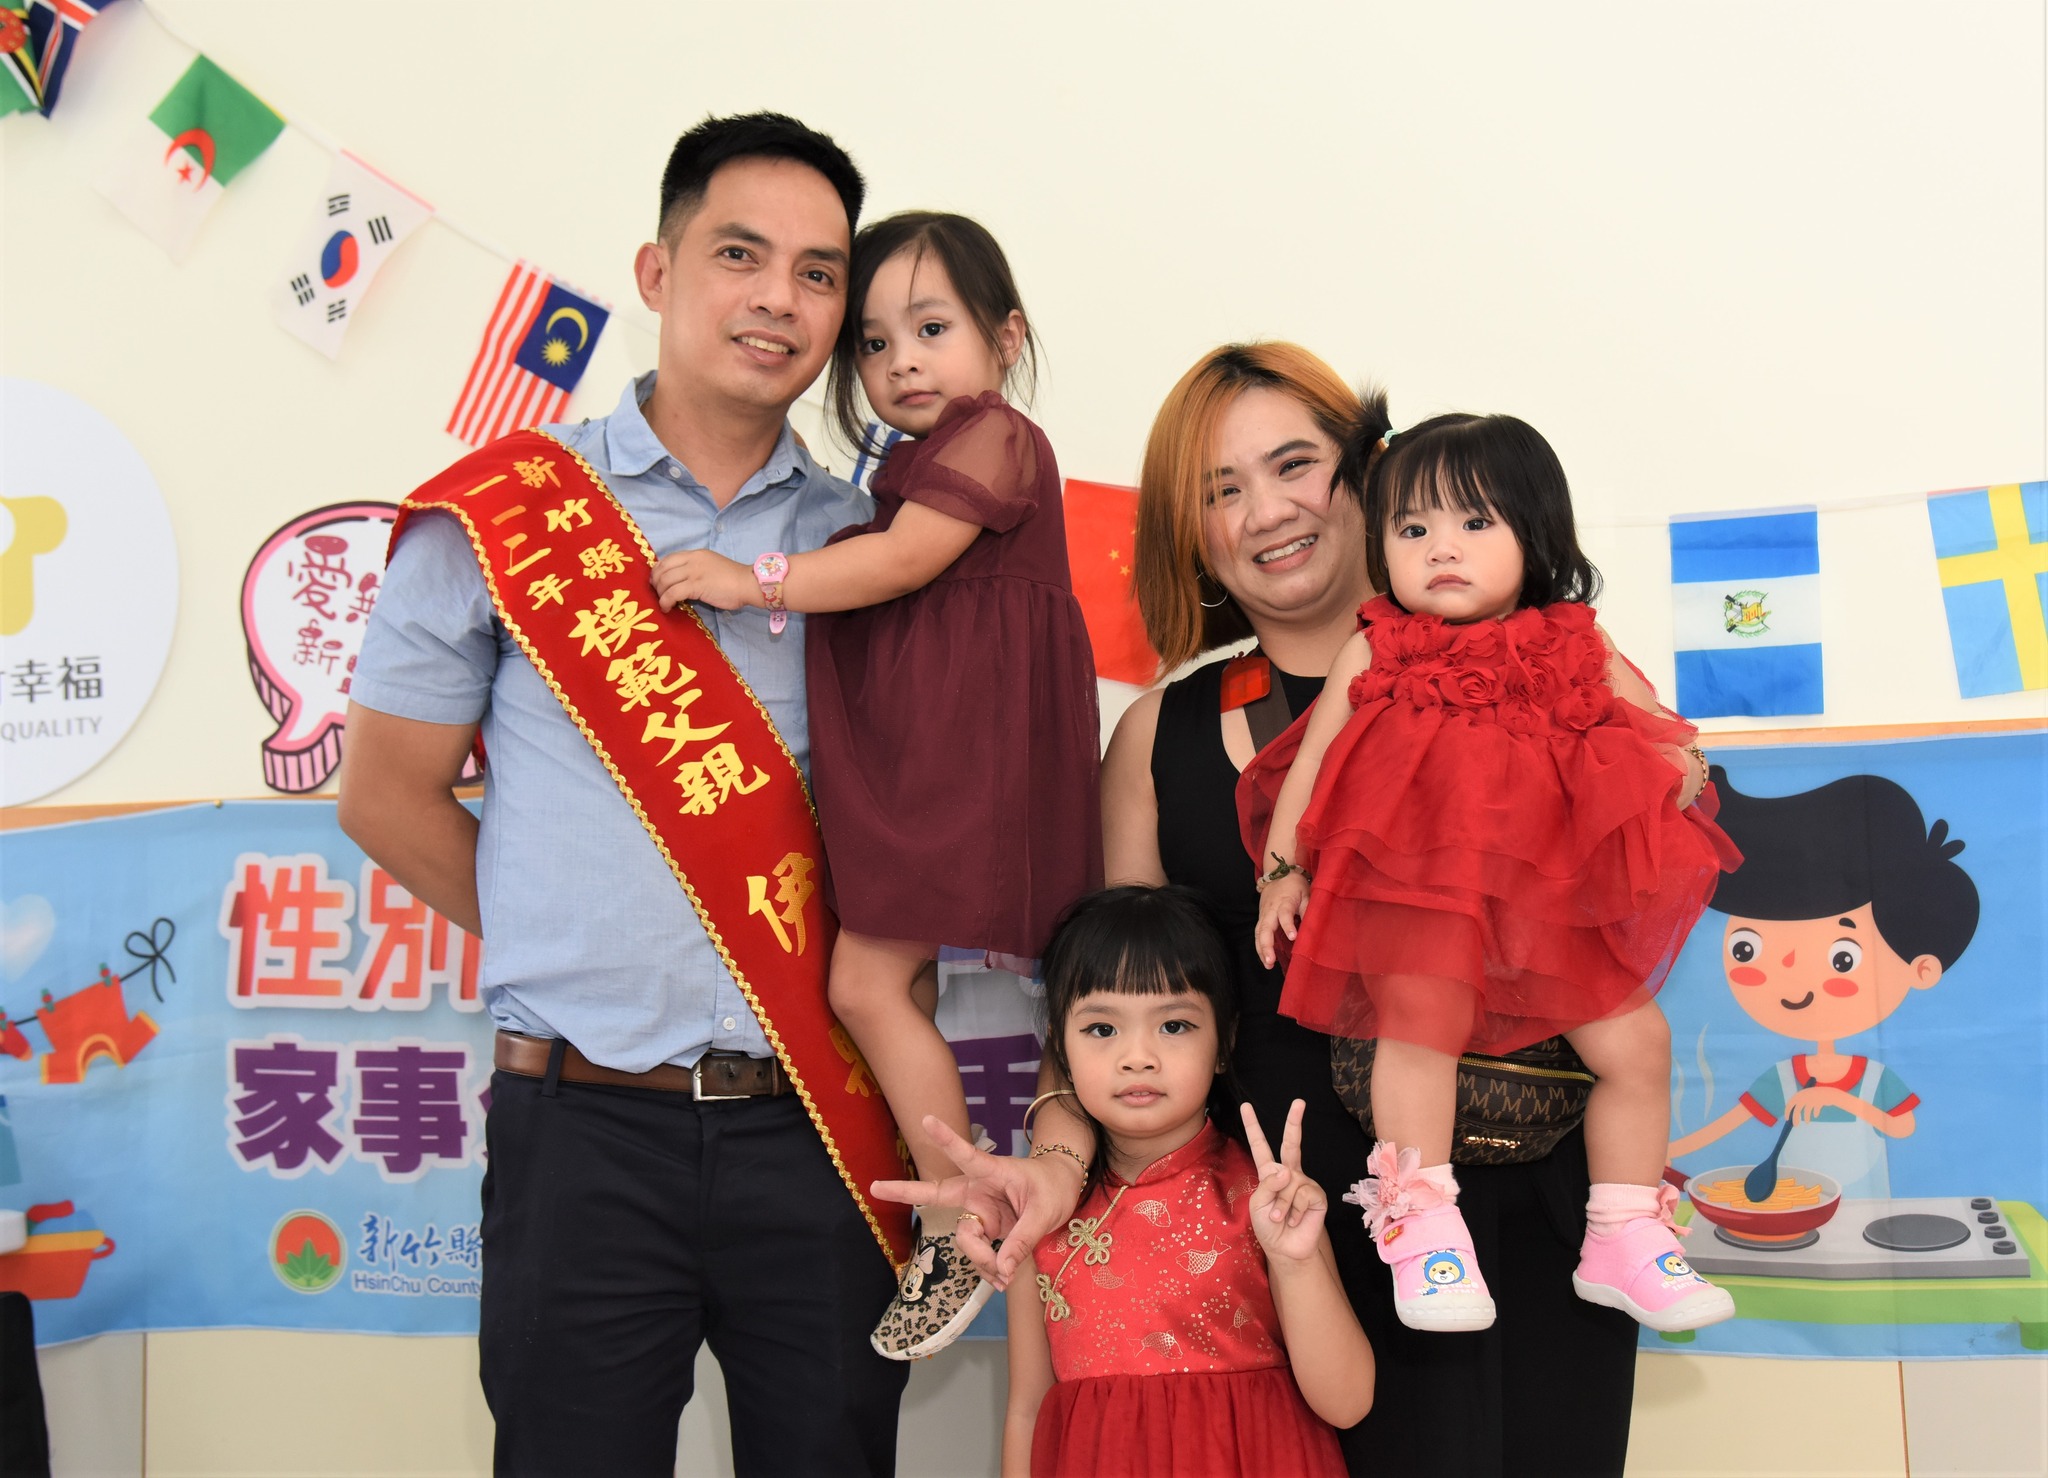 Hsinchu County has dubbed a new Filipino immigrant (伊果) a model father.  Photo reproduced from Hsinchu County Social Affairs Department Facebook